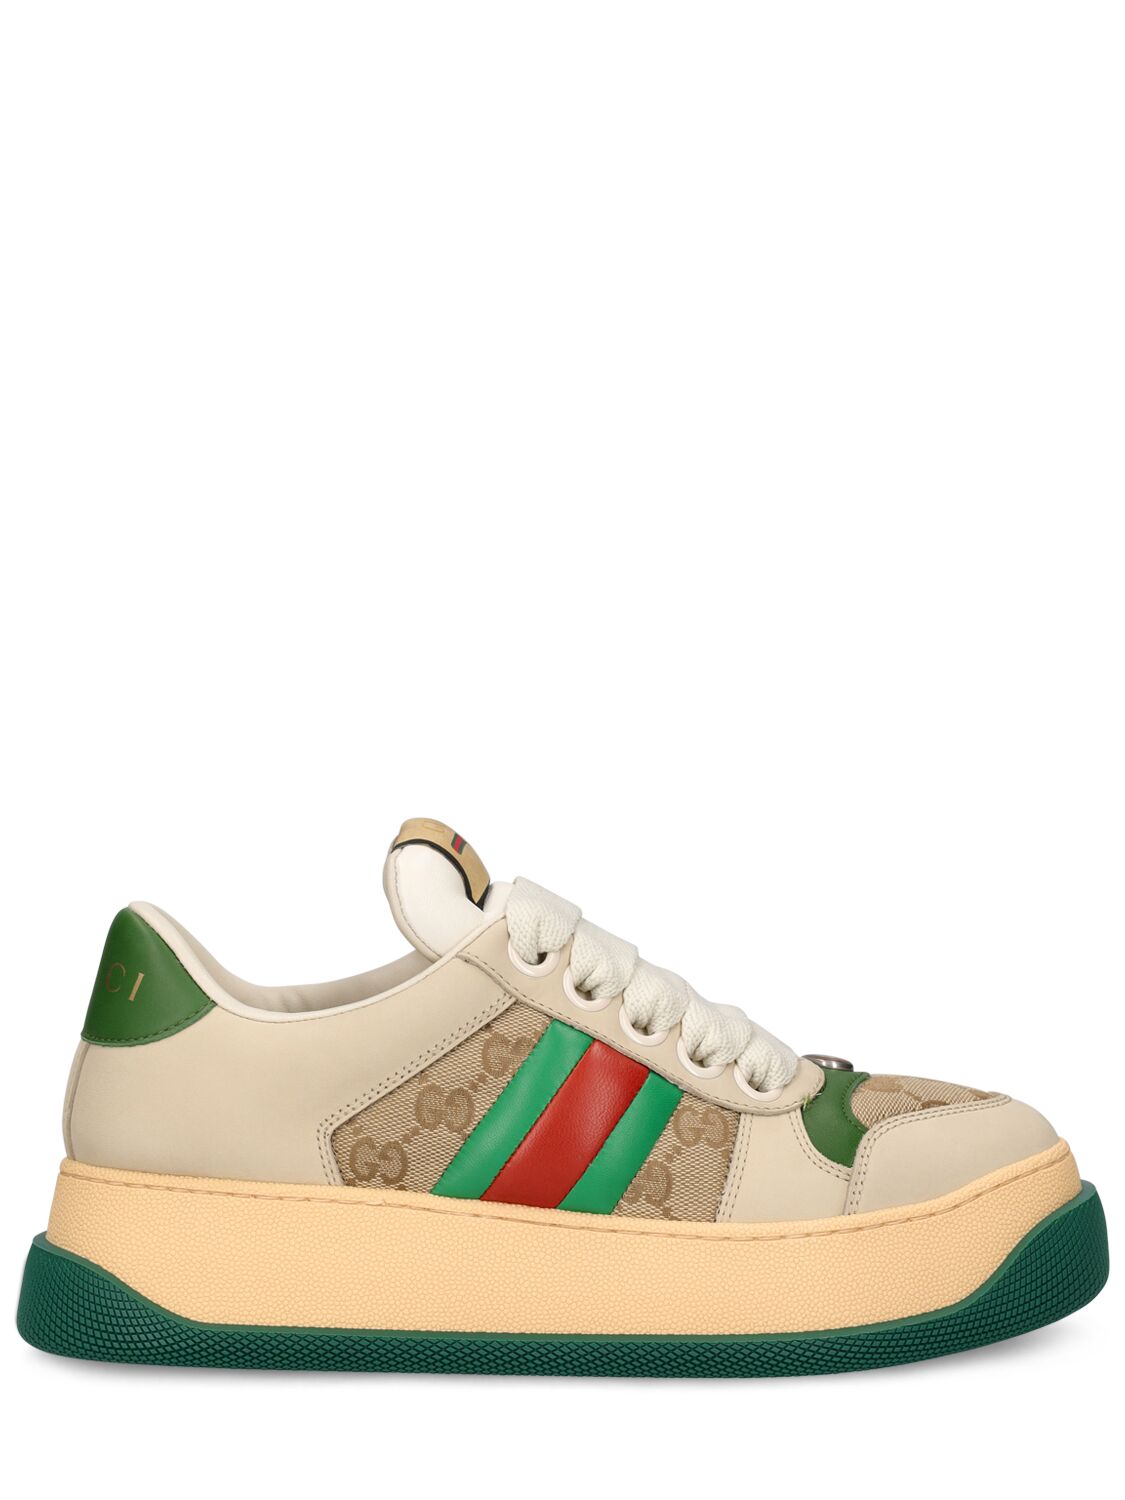 Shop Gucci 50mm Screener Leather Sneakers W/ Web In White,green